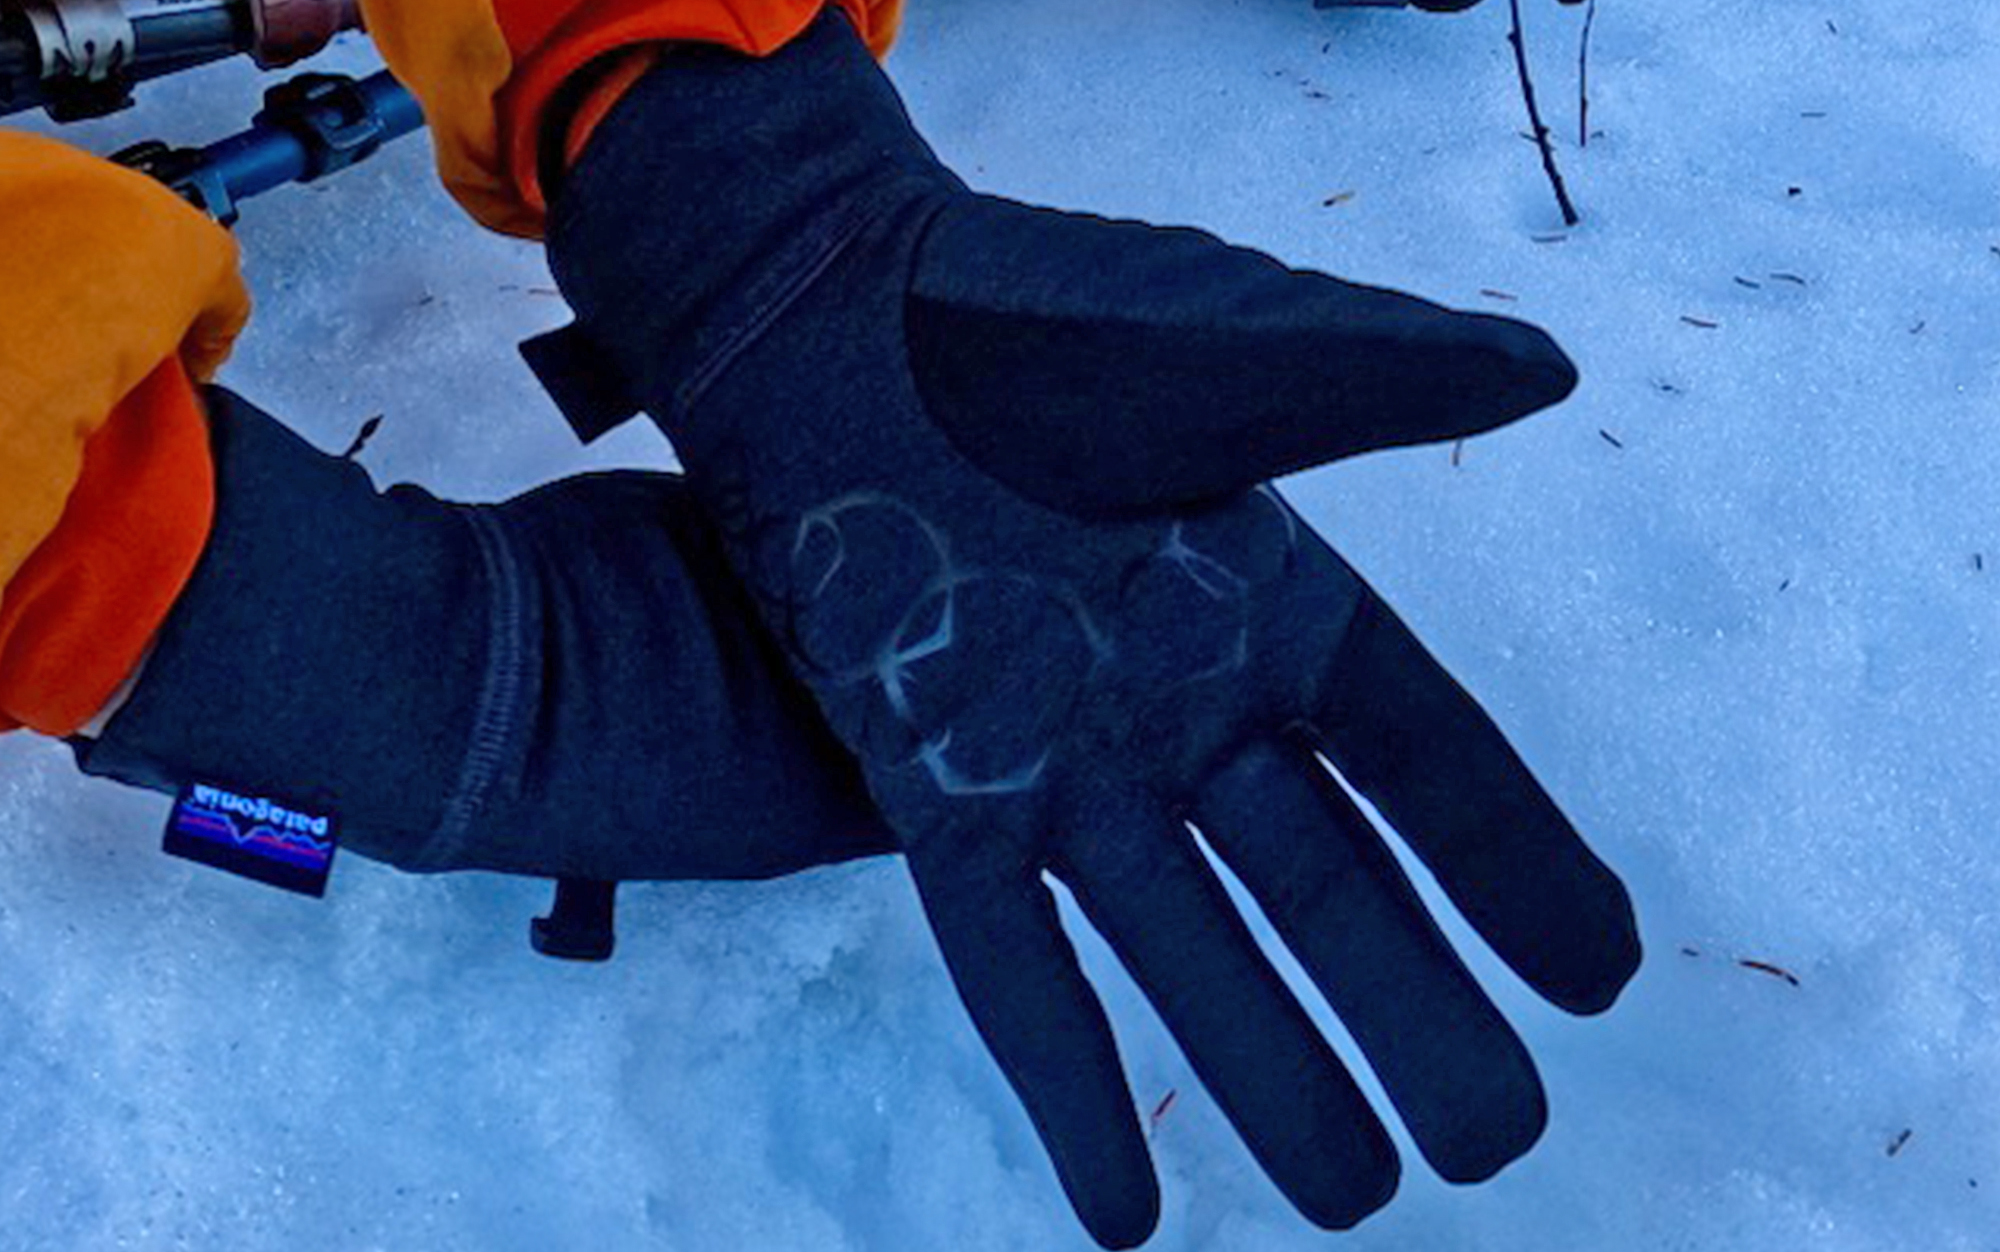 Patagonia's glove liners have grips on the palm.